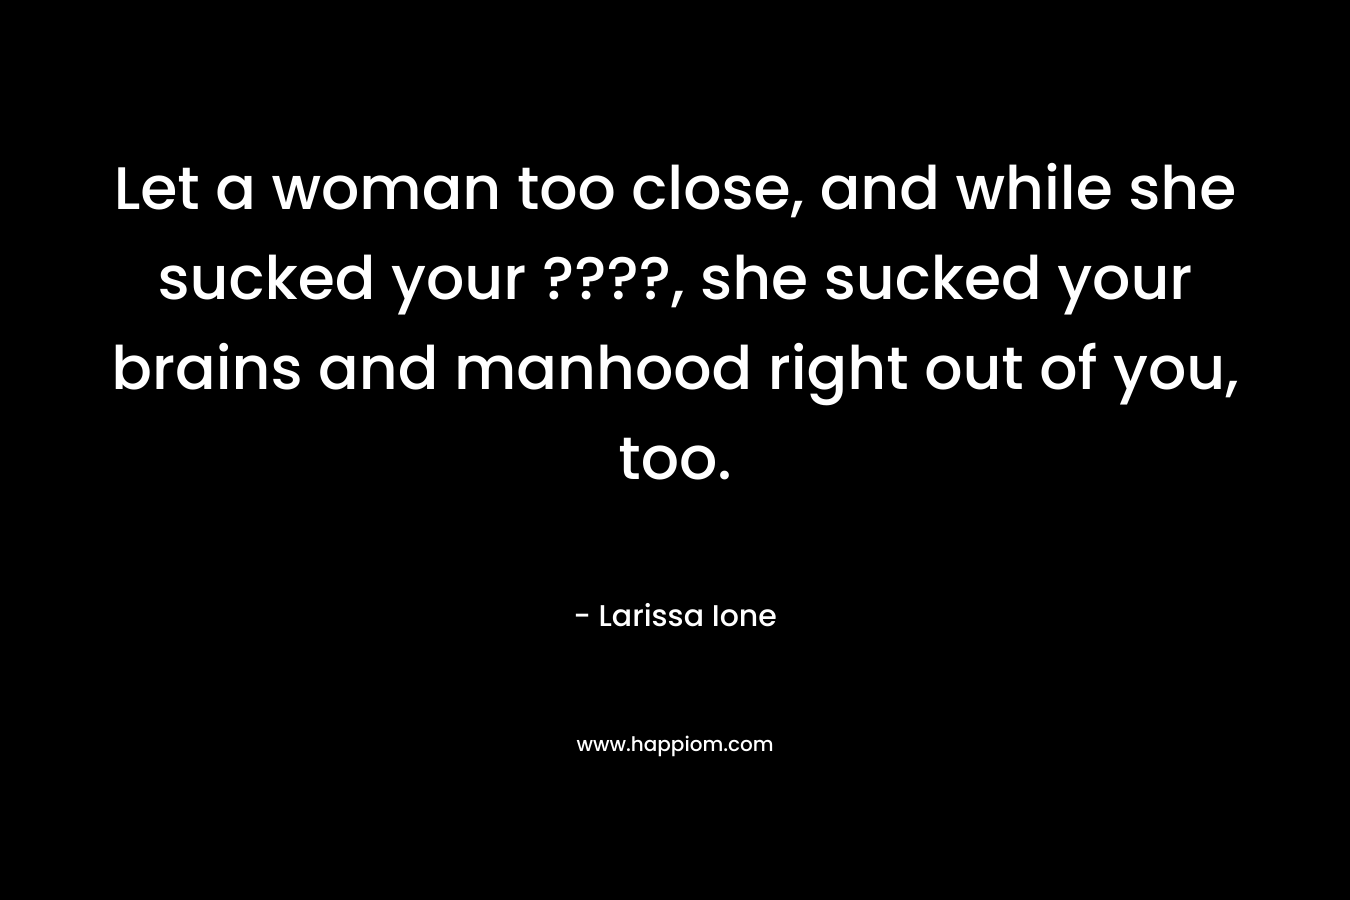 Let a woman too close, and while she sucked your ????, she sucked your brains and manhood right out of you, too. – Larissa Ione